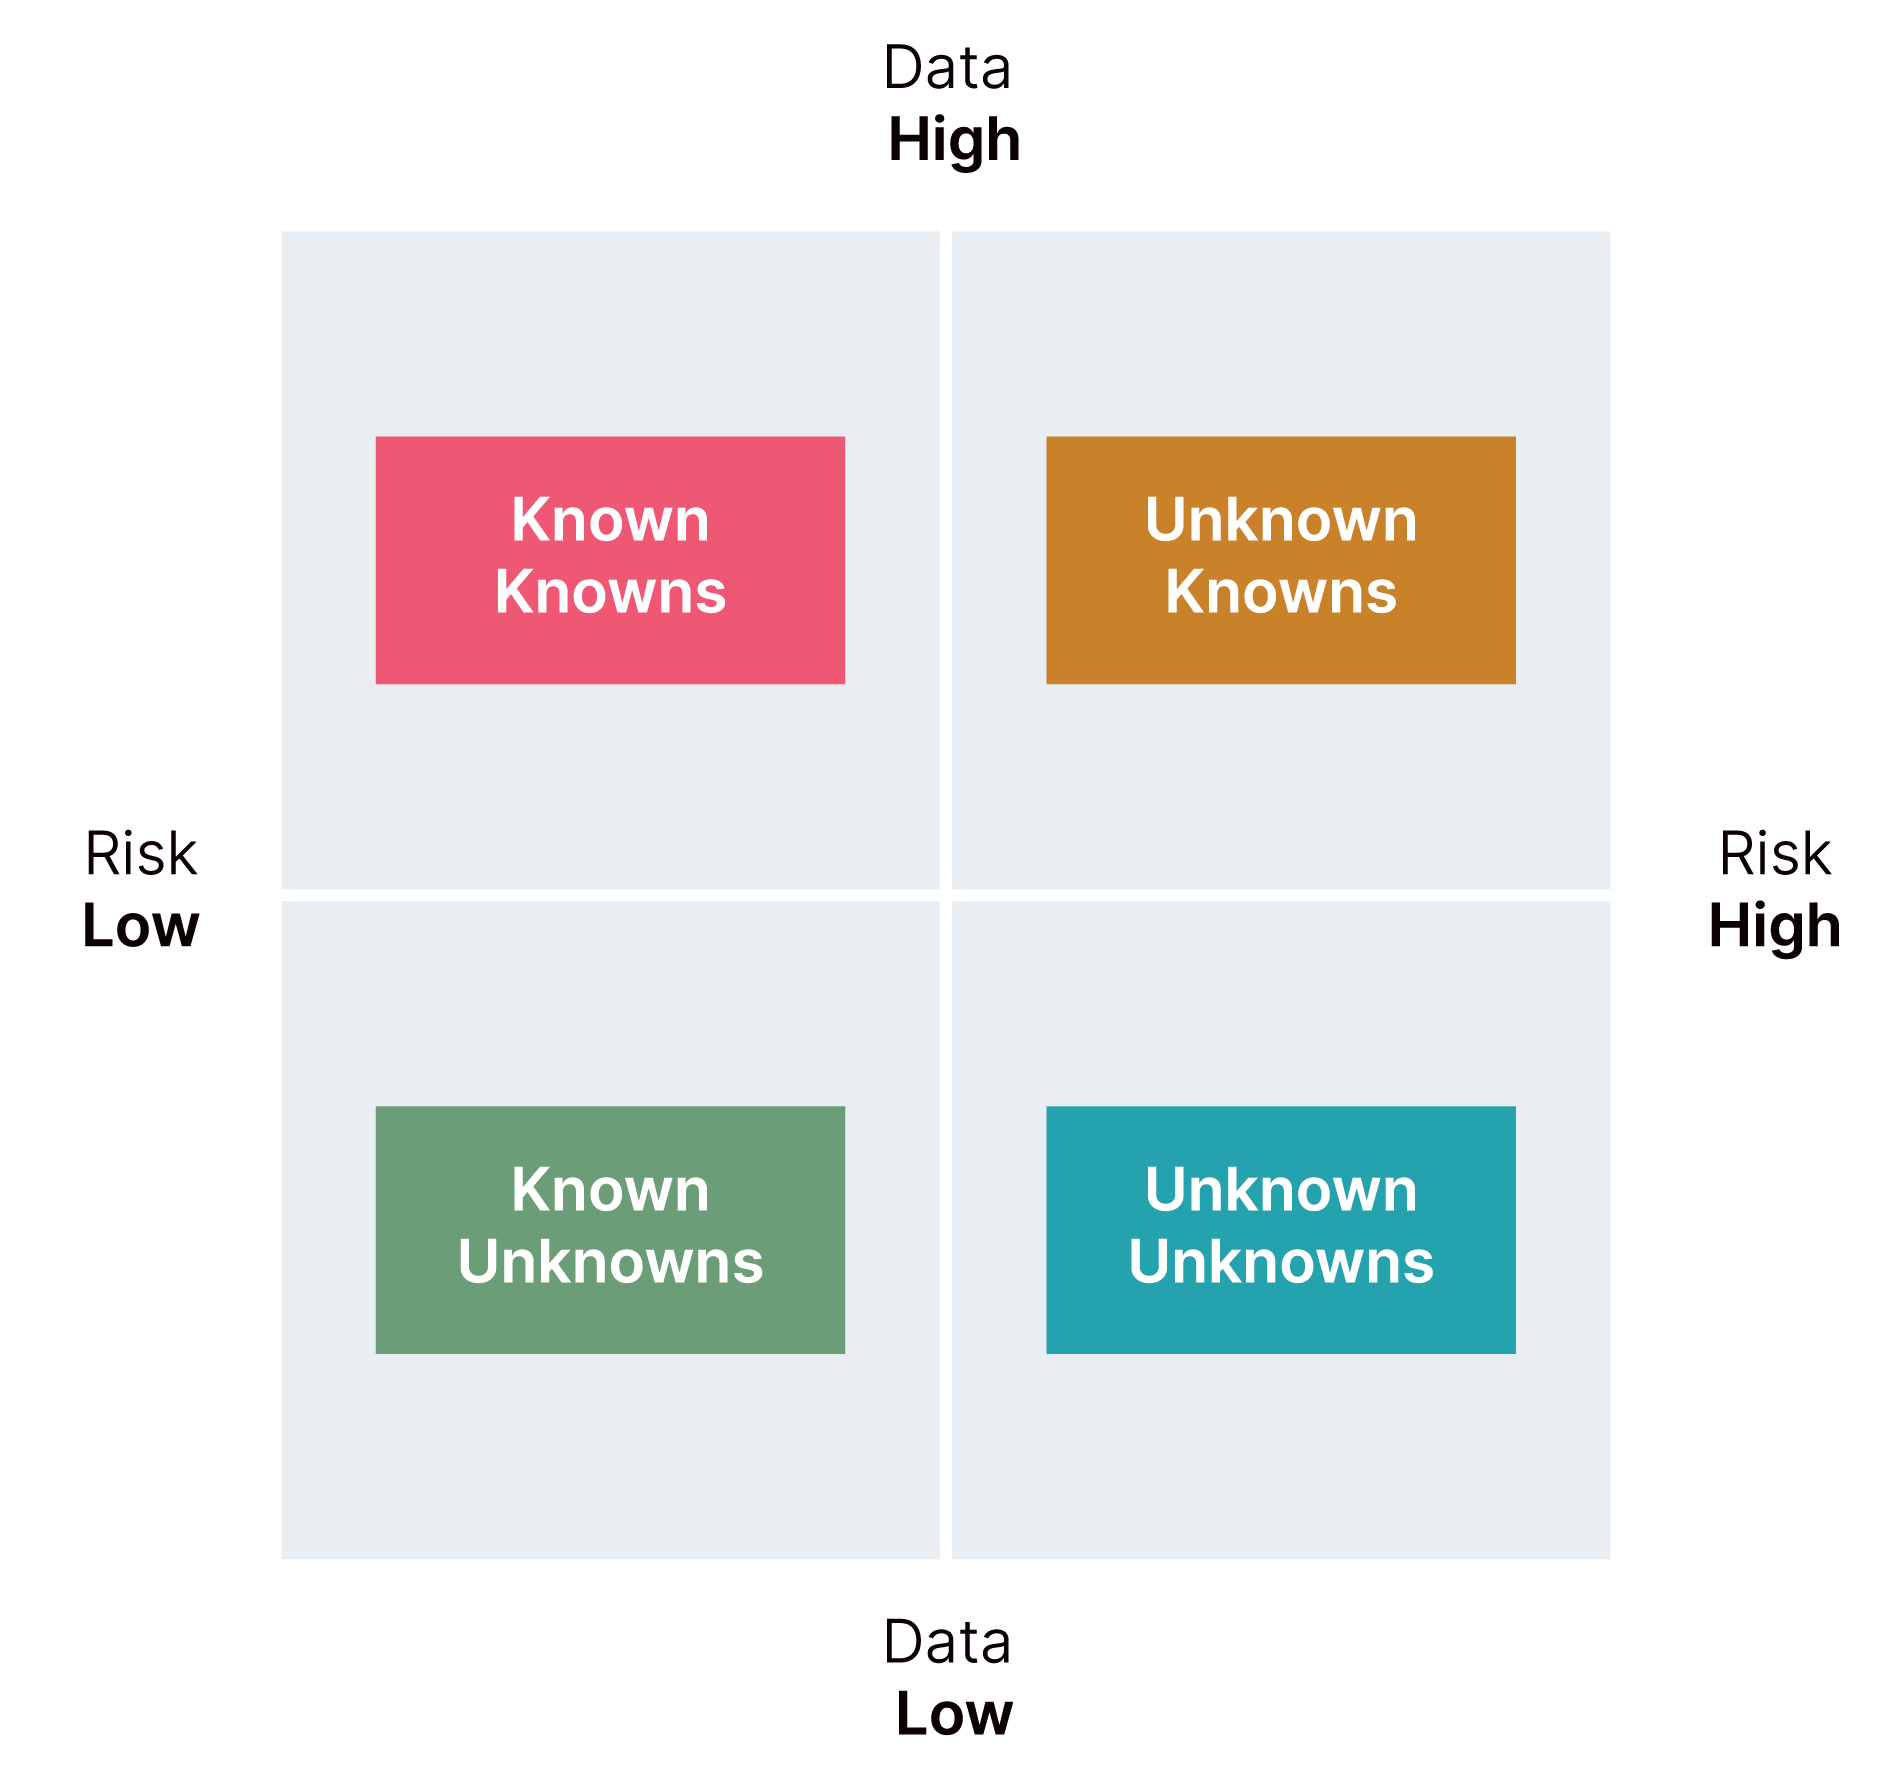 Bottom X-axis is Low Data, Top X-axis is High Data. Right Y-axis is High Risk, left Y-axis is Low Risk. In a clockwise direction, the 2x2 grid shows the different problems teams usually solve against these dimensions including Unknown Knowns, Unknown Unknown, Known Unknowns and Known Knowns.